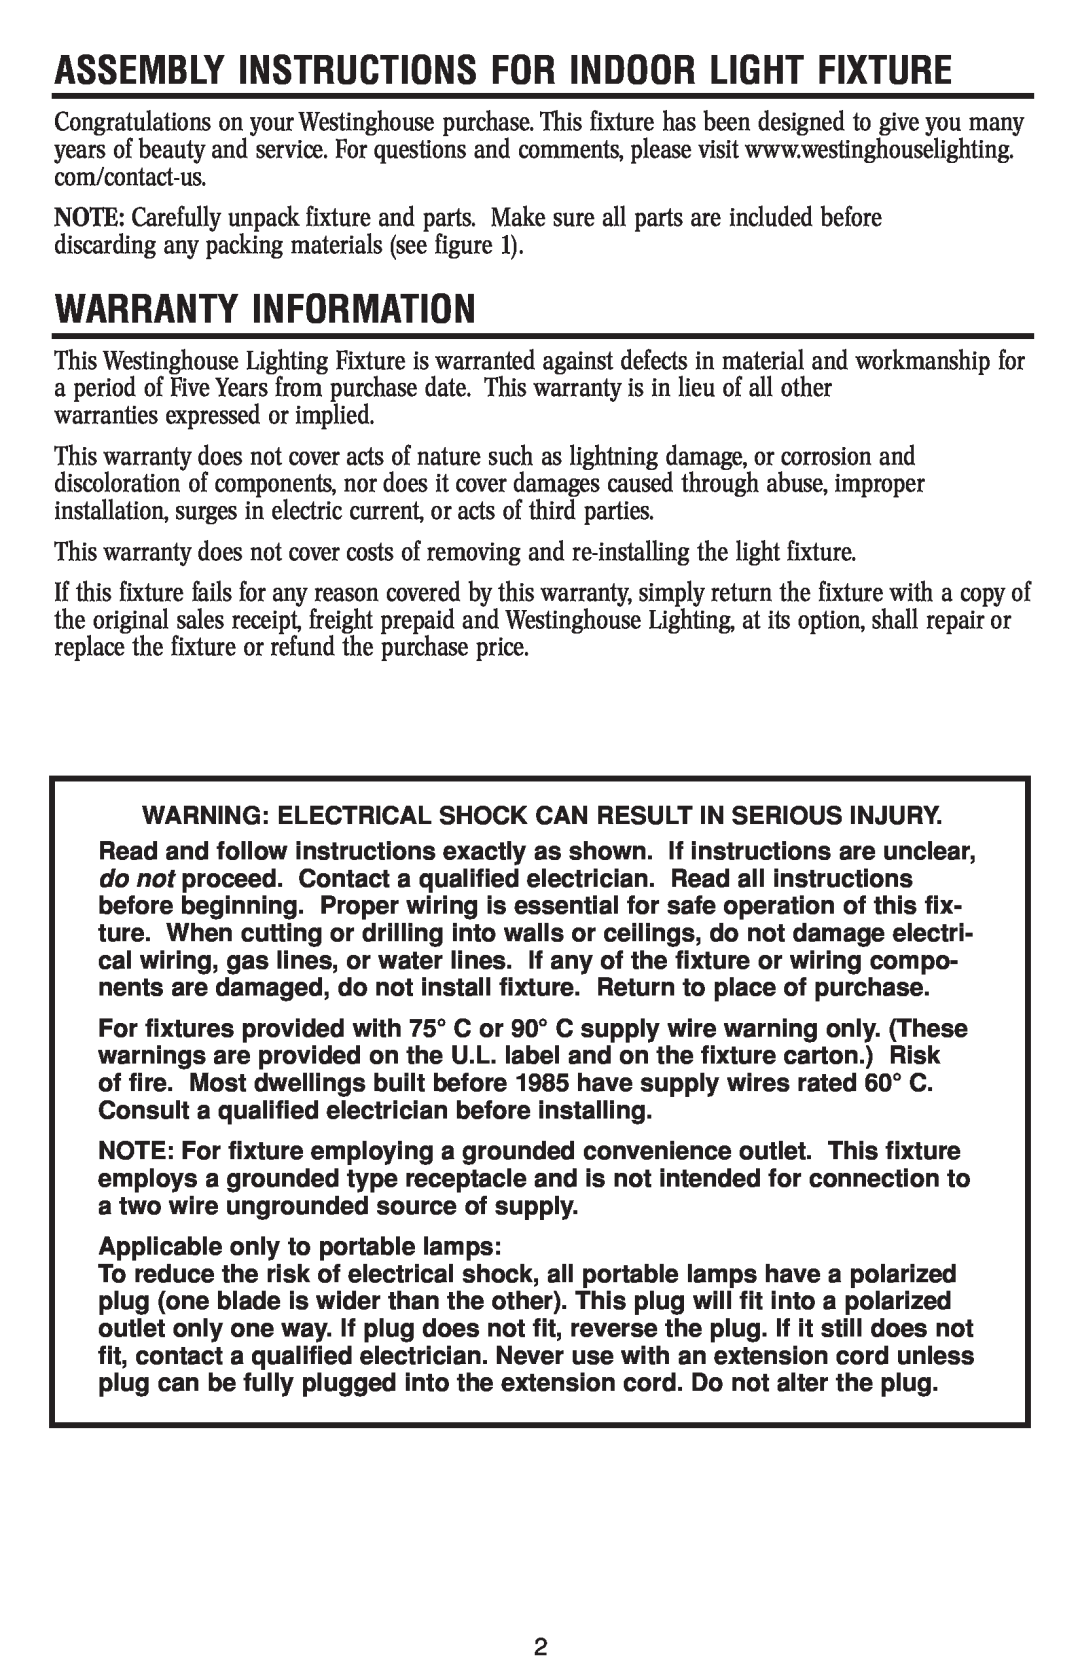 Westinghouse 120112 owner manual Warranty Information, Assembly Instructions For Indoor Light Fixture 